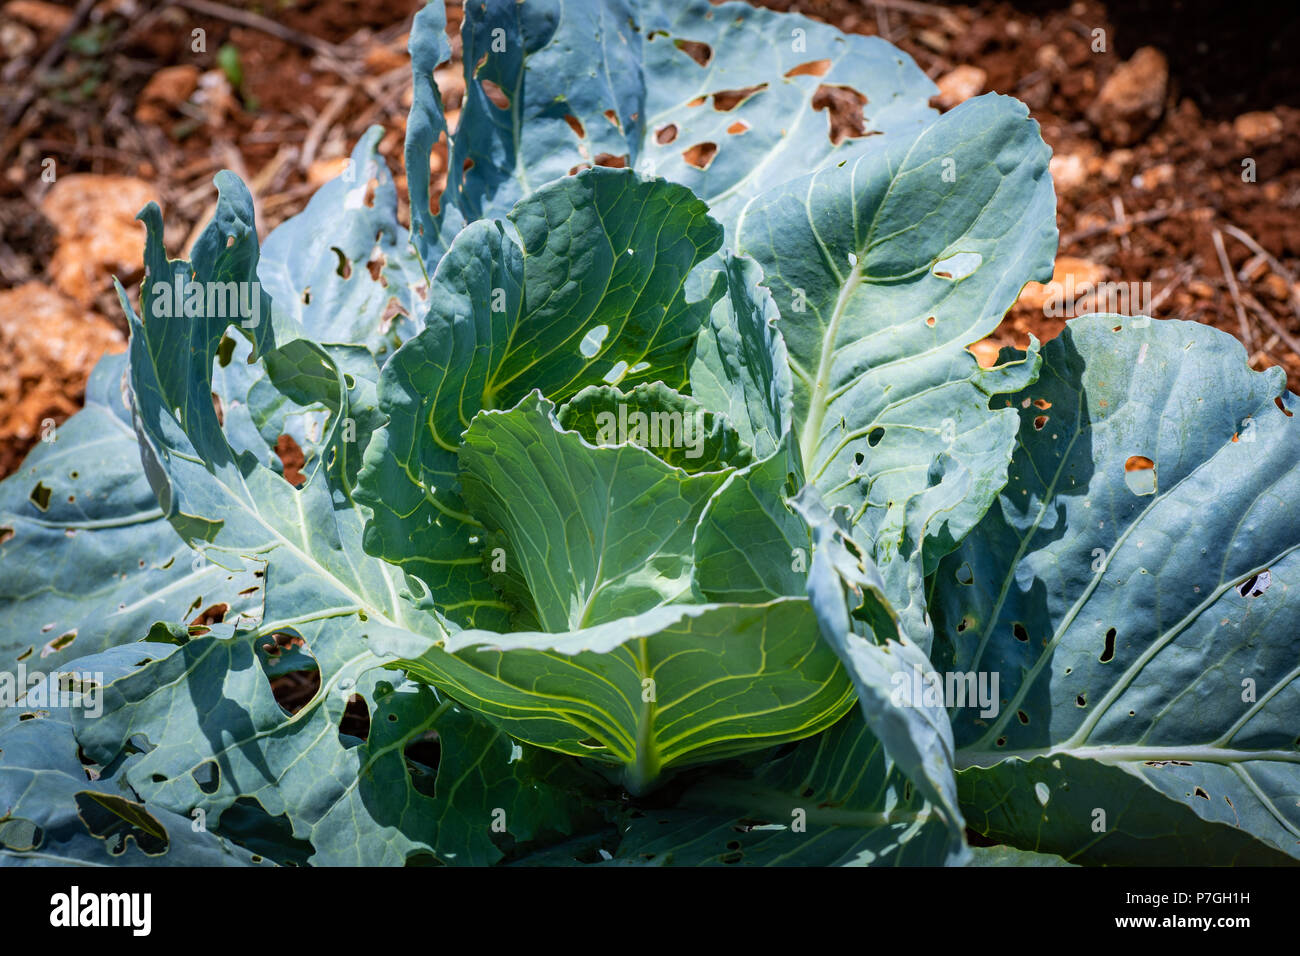 Close up on young cabbage vegetable growing in the field outdoors with many holes in its leaves from insects. Stock Photo